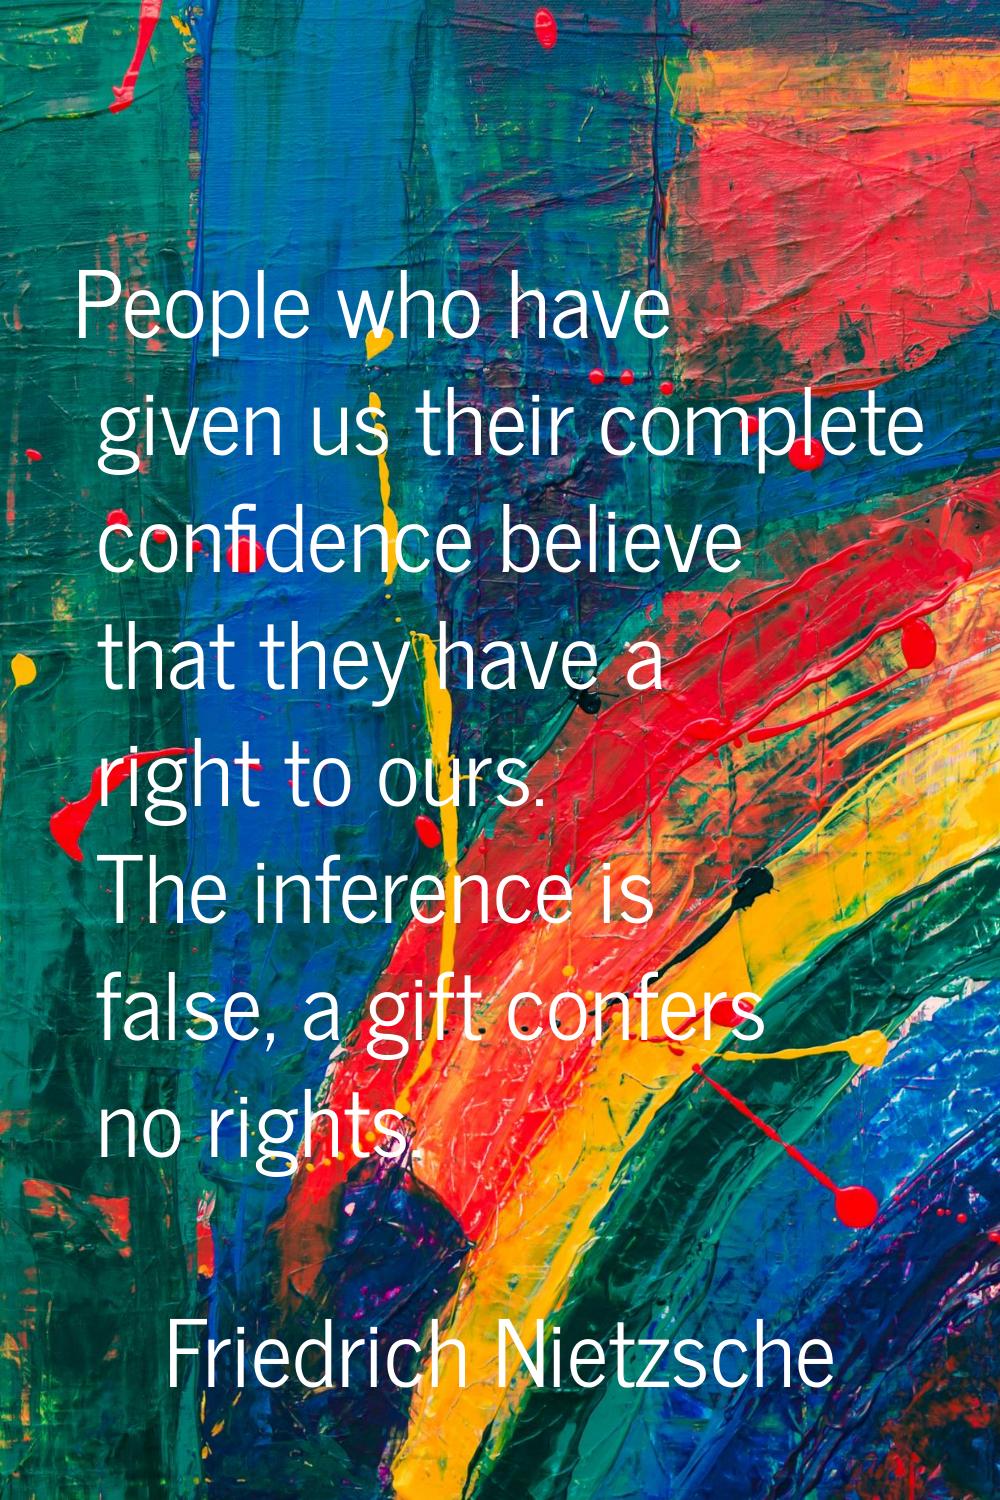 People who have given us their complete confidence believe that they have a right to ours. The infe